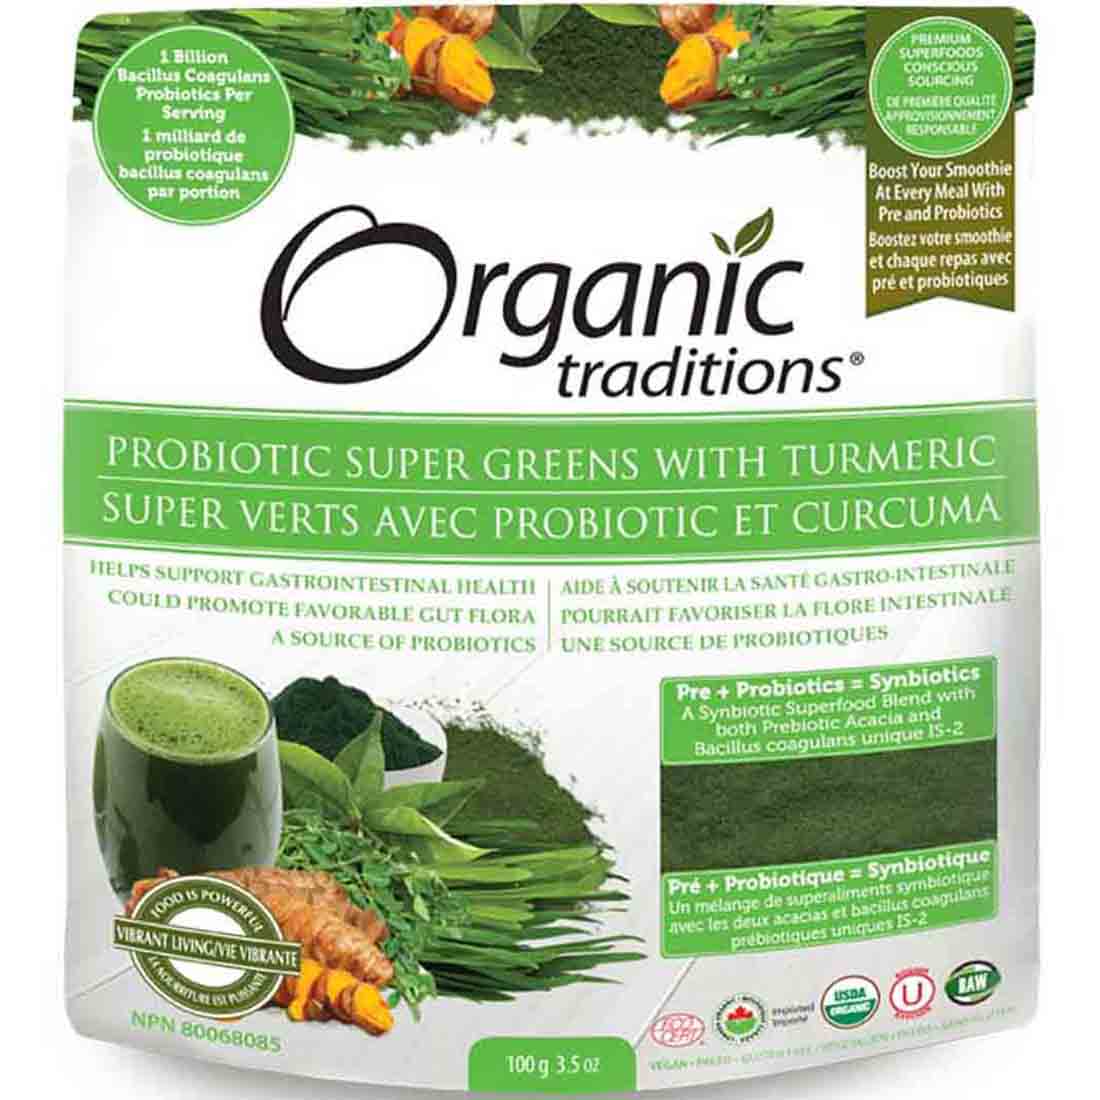 Organic Traditions Probiotic Smoothie Mix, 200g